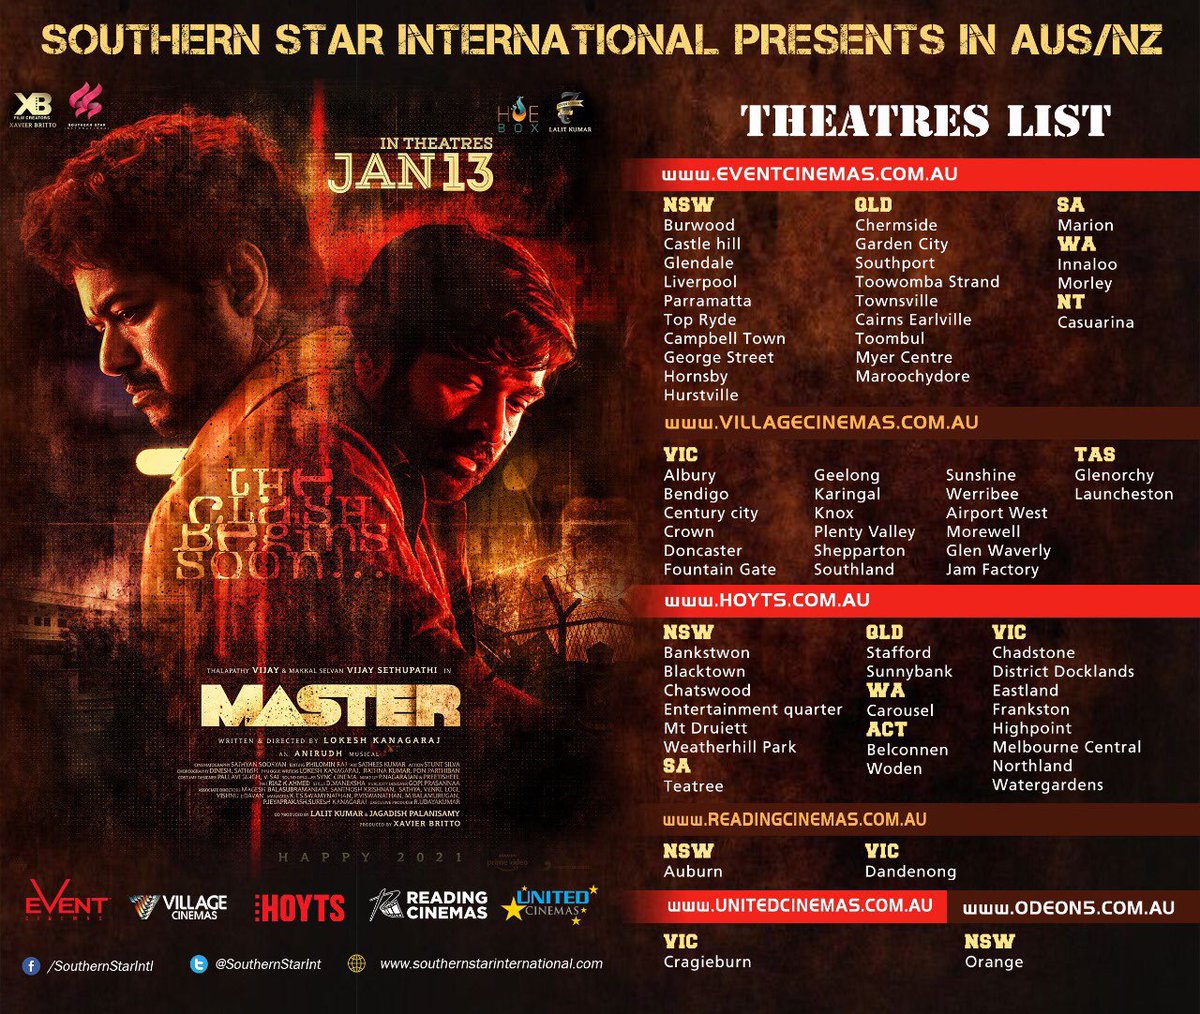 #MasterFilm Australia Release by @SouthernStarInt and here’s the location list. @actorvijay #Master